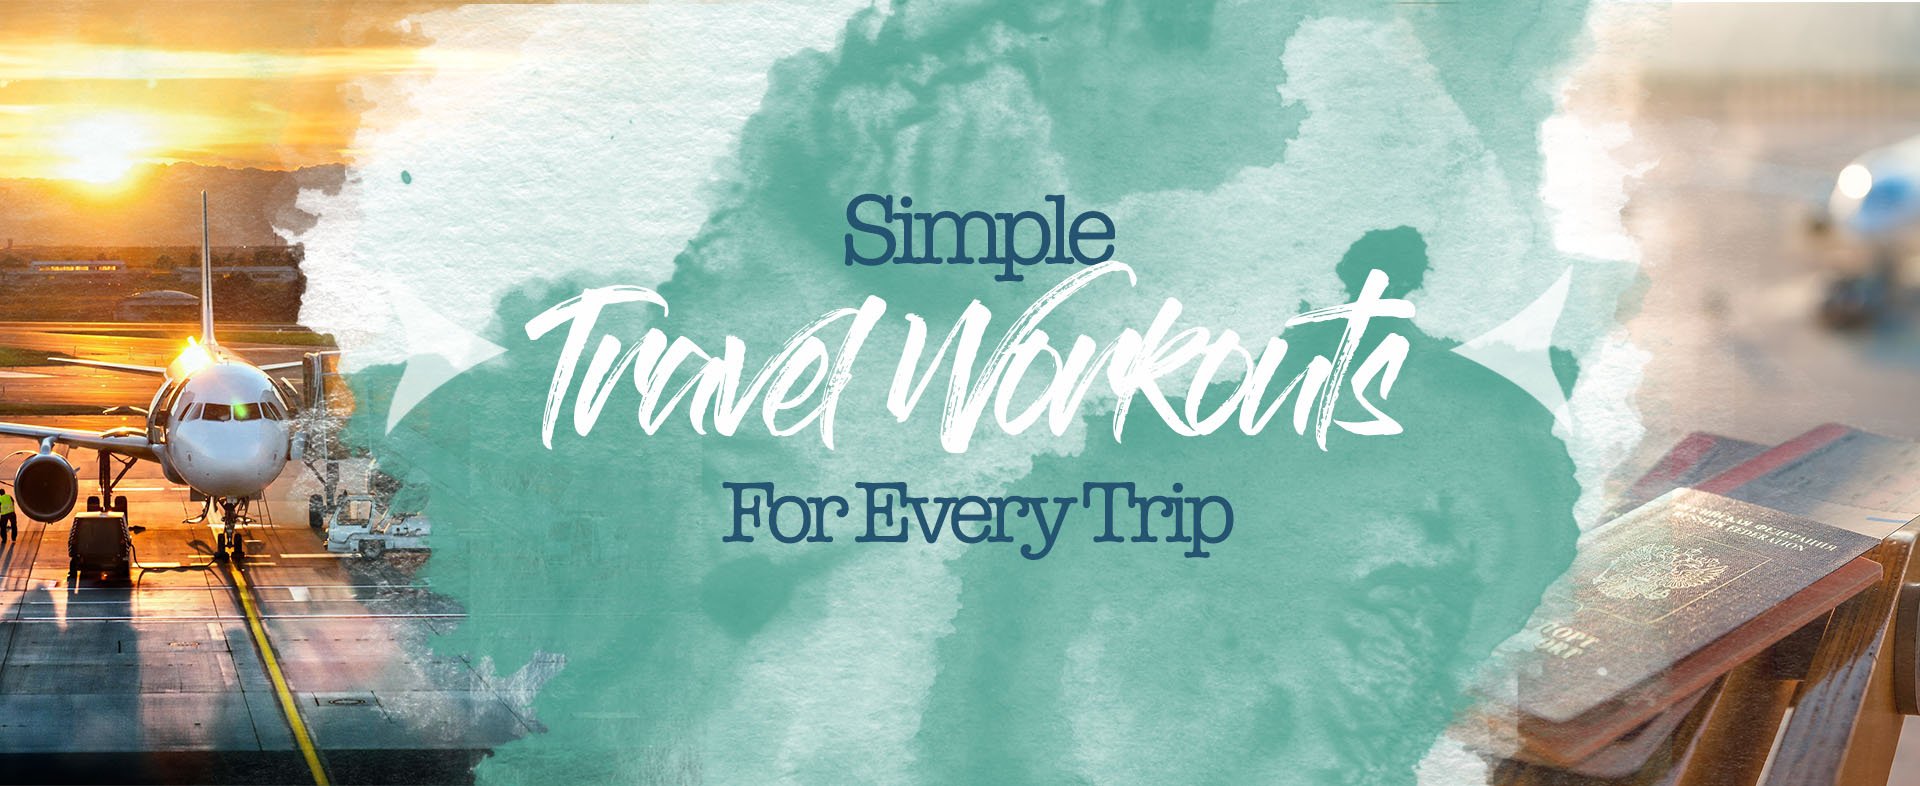 Simple Travel Workouts For Every Trip